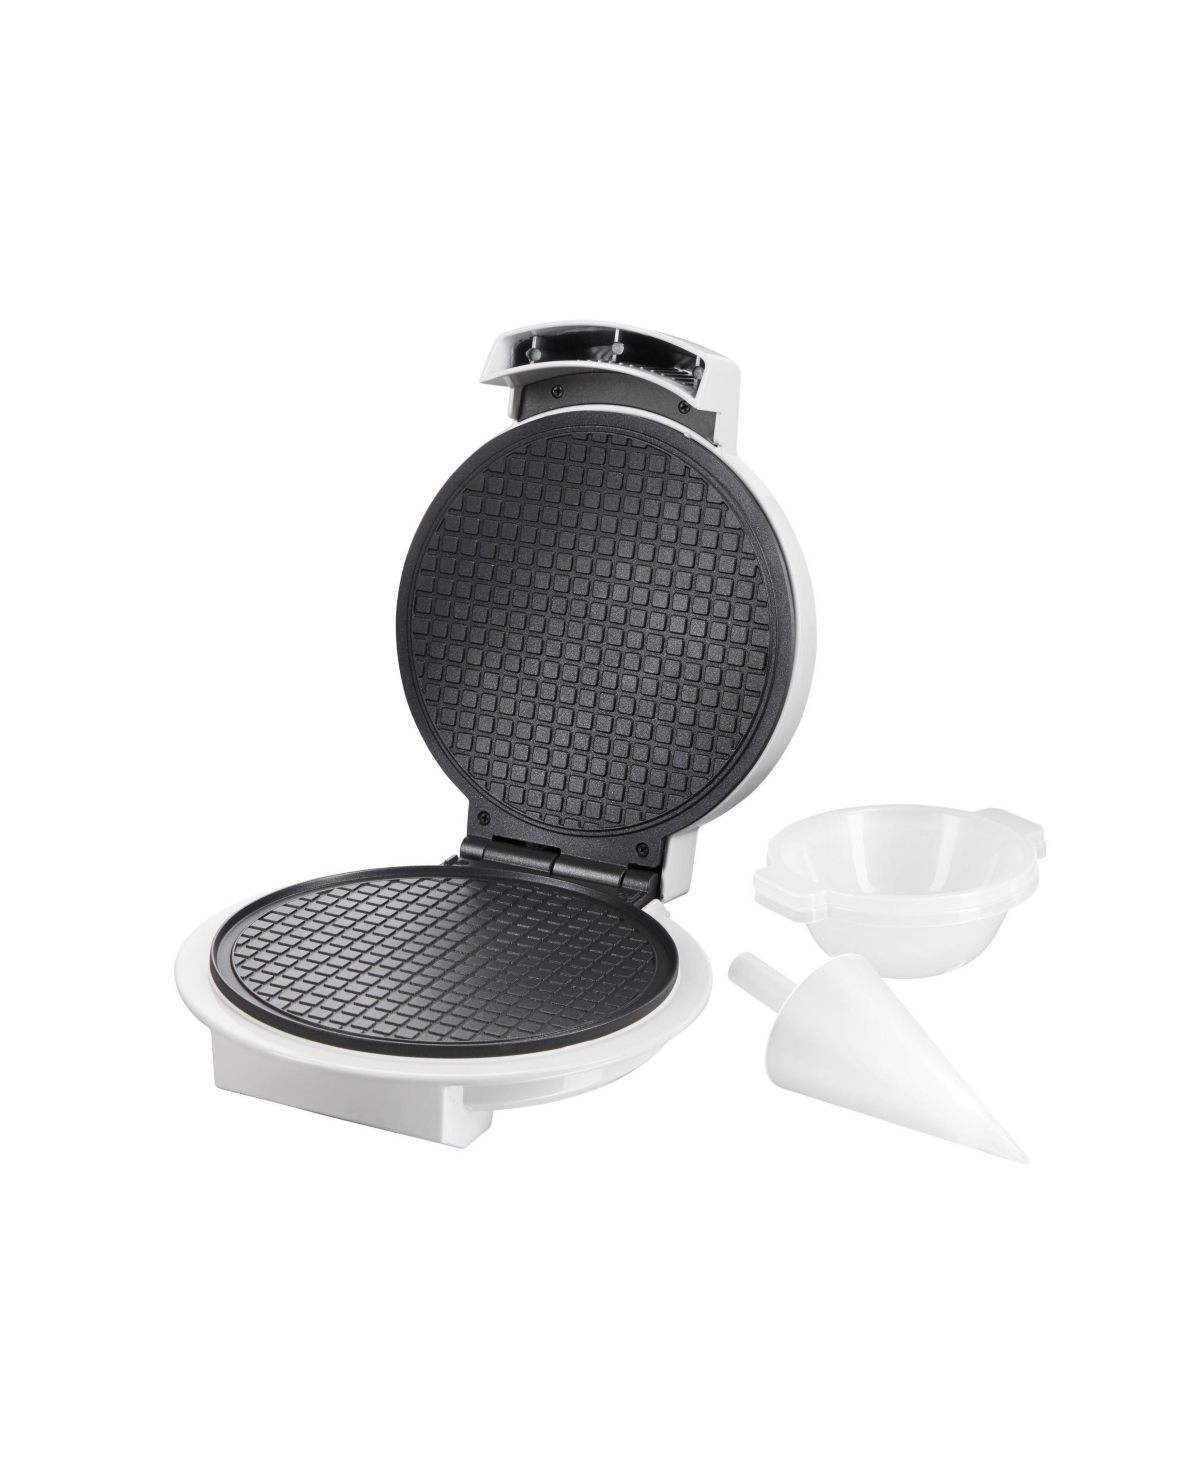 Proctor Silex Waffle Cone And Bowl Maker In White